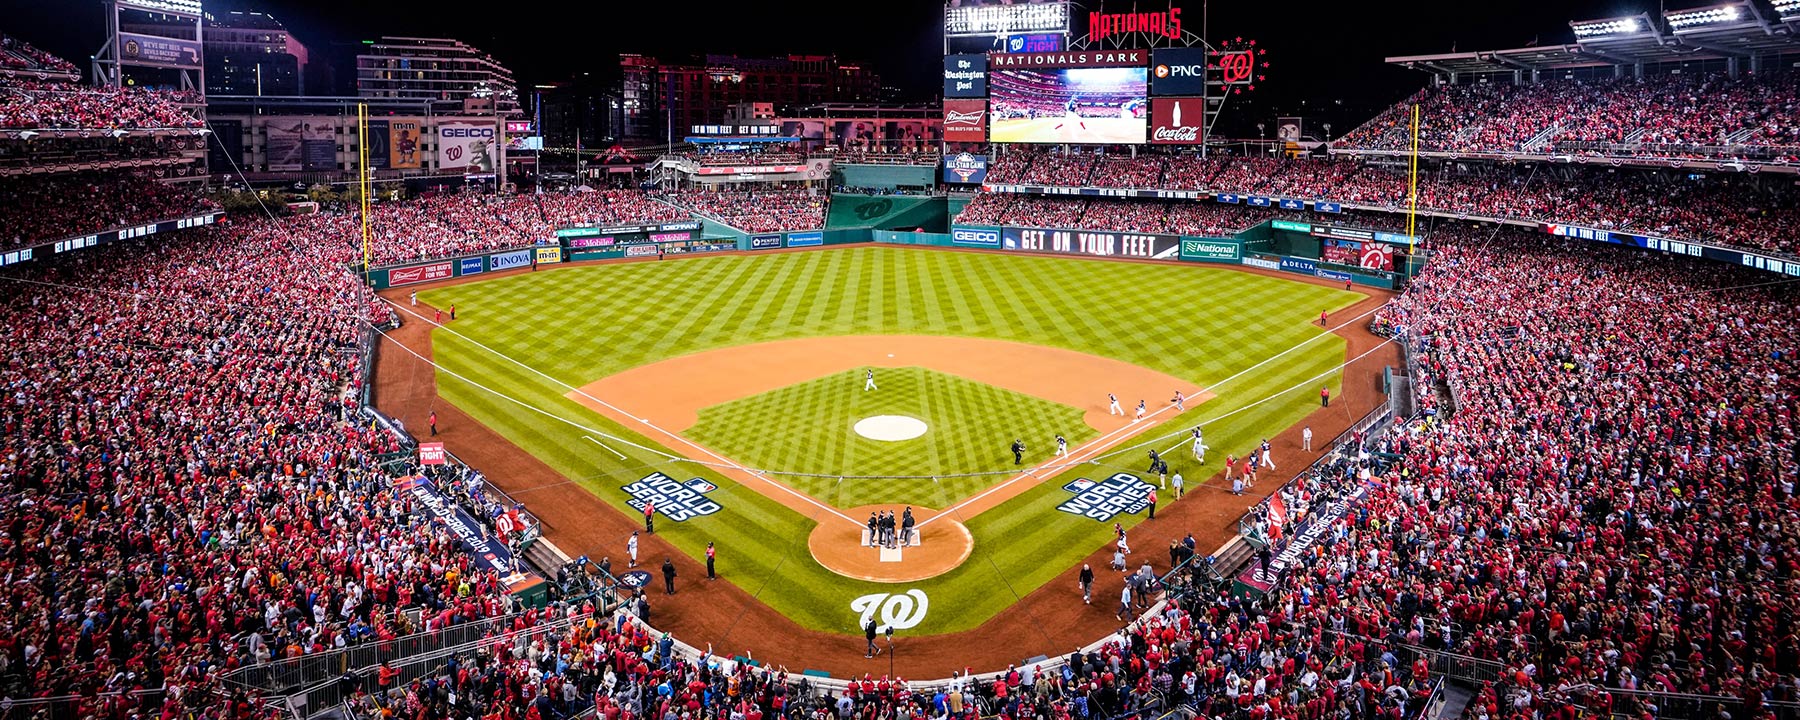 Nationals Park during game 4 of the 2019 World Series